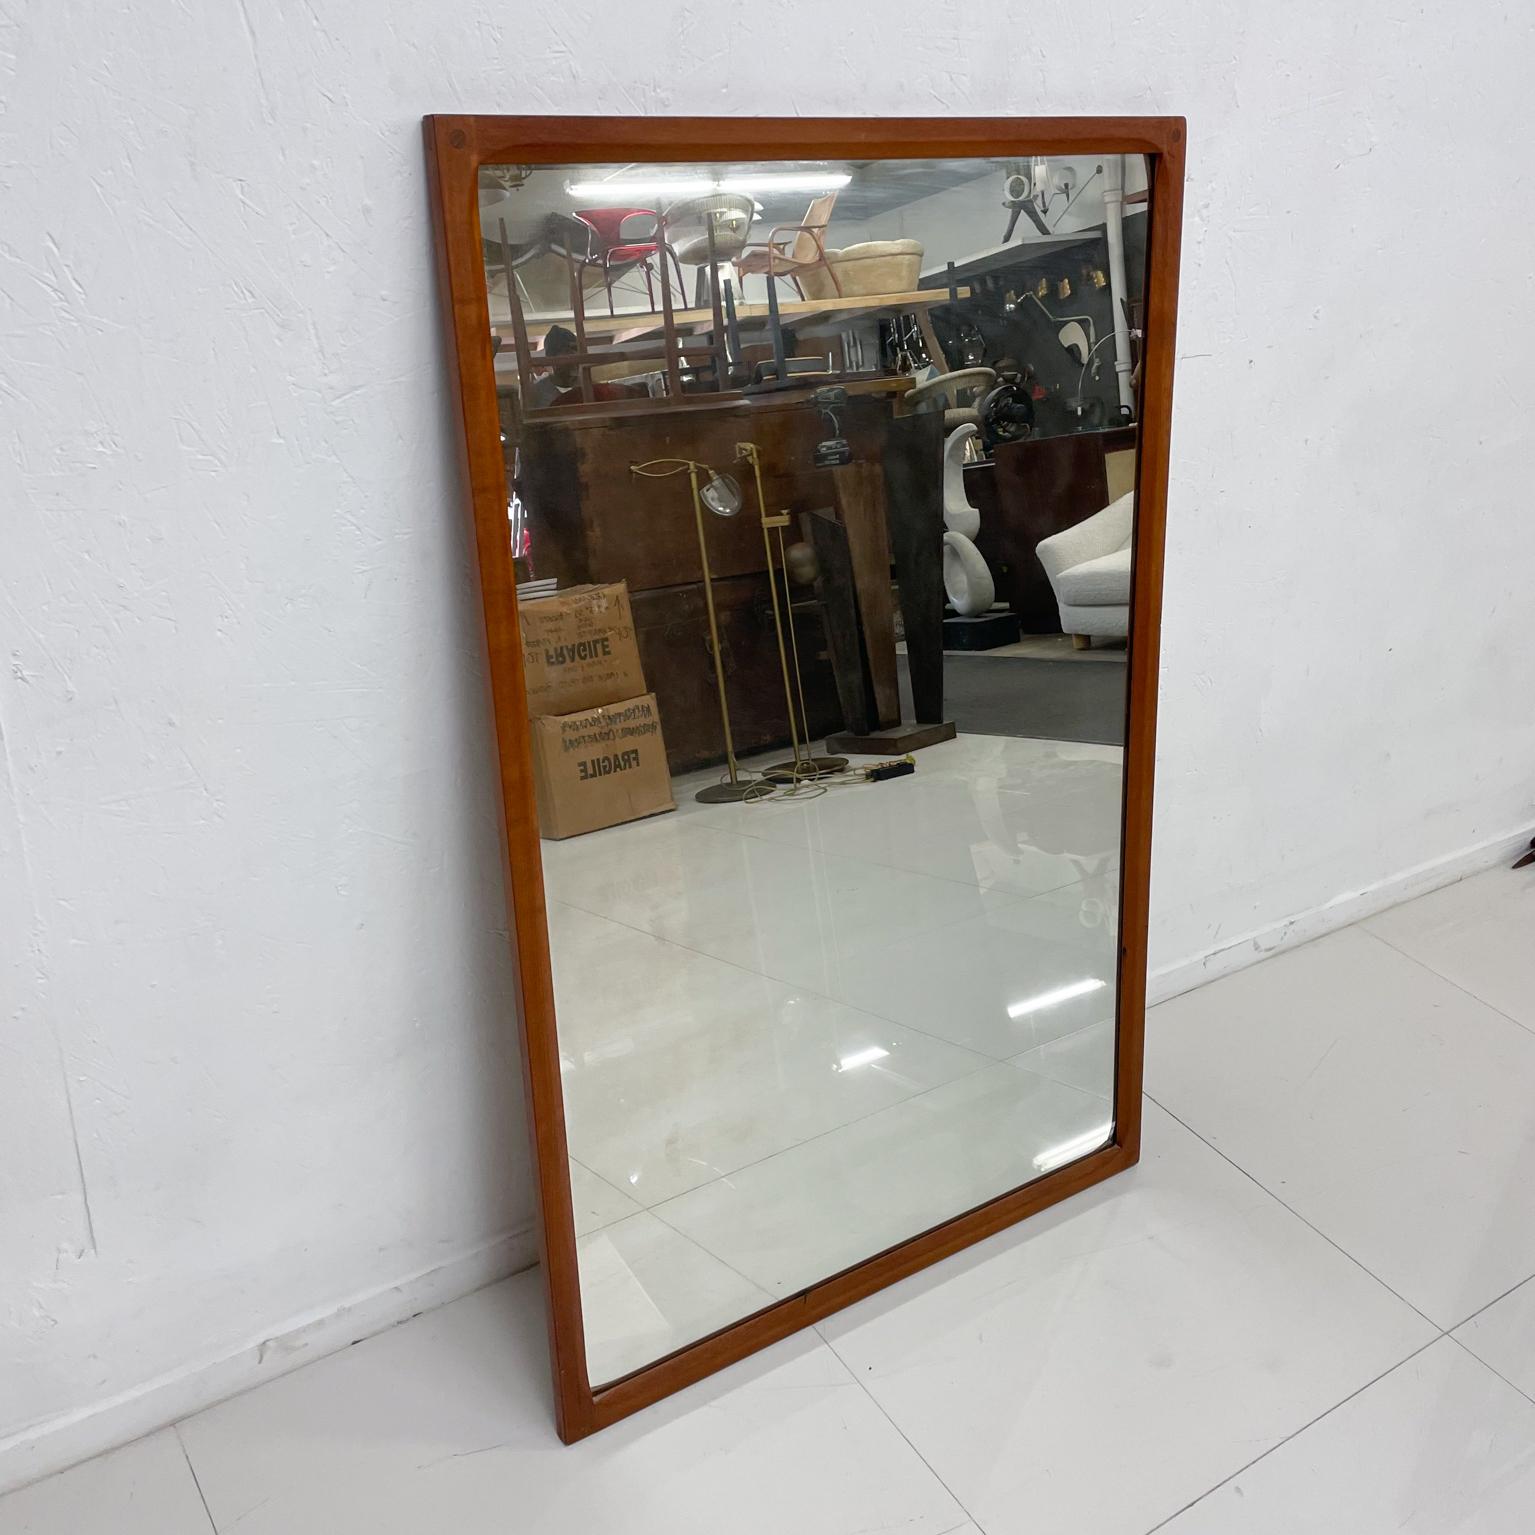 For your consideration:
from designer Kai Kristiansen teak wall mirror manufactured by Aksel Kjersgaard A/S Odder, Denmark Scandinavian Modern
Lovely midcentury modern clean minimalism. Tight joinery featuring a circular inset within the